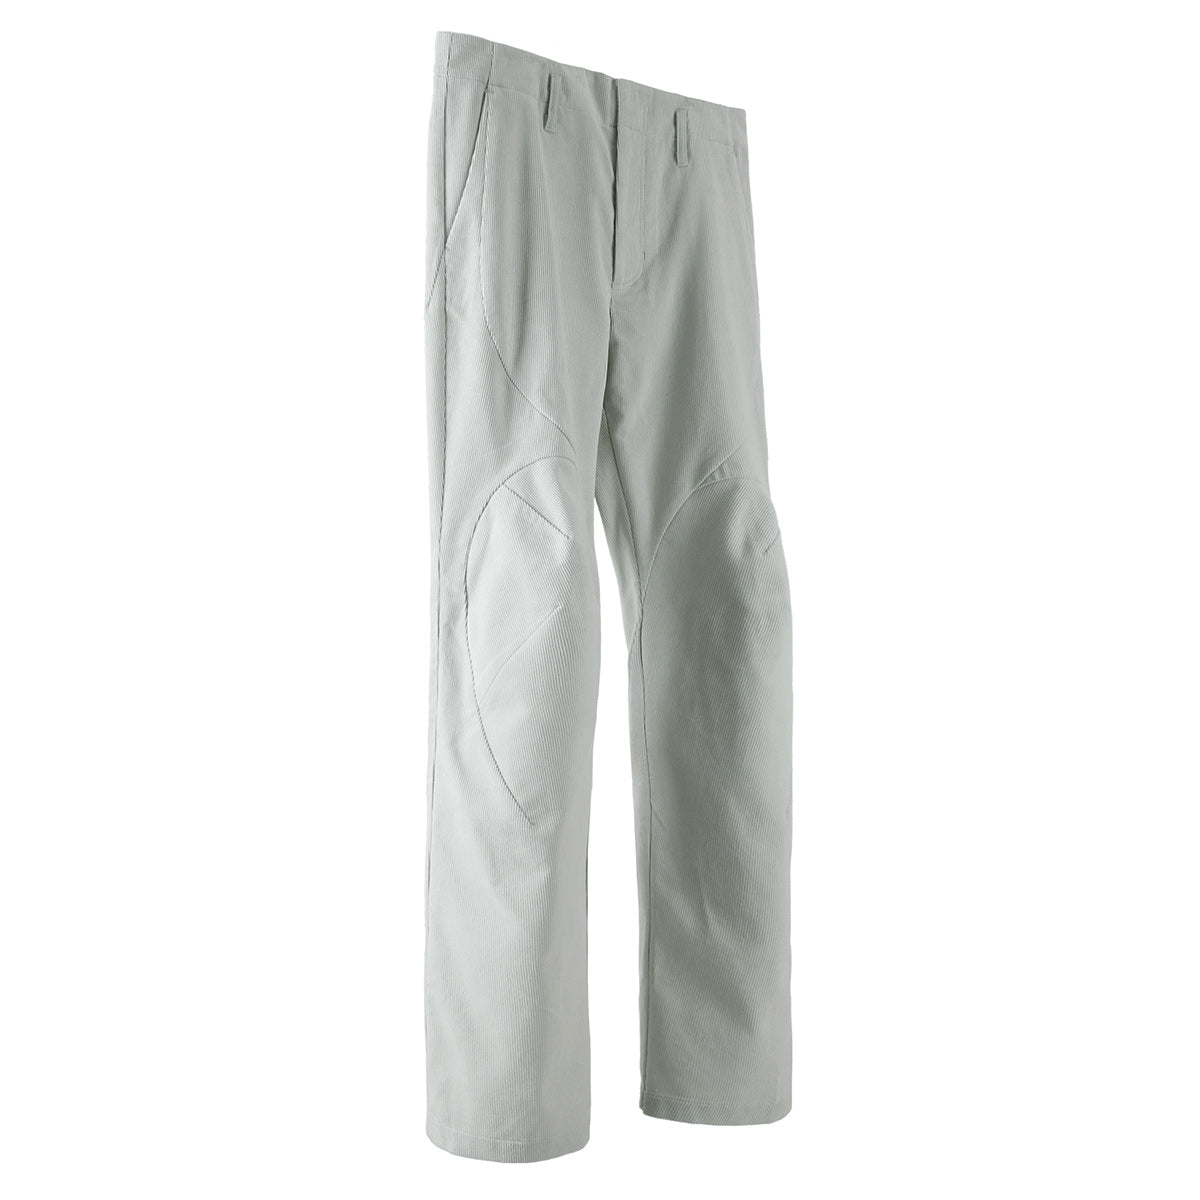 Post archive faction5.0 TECHNICAL PANTS | www.causus.be